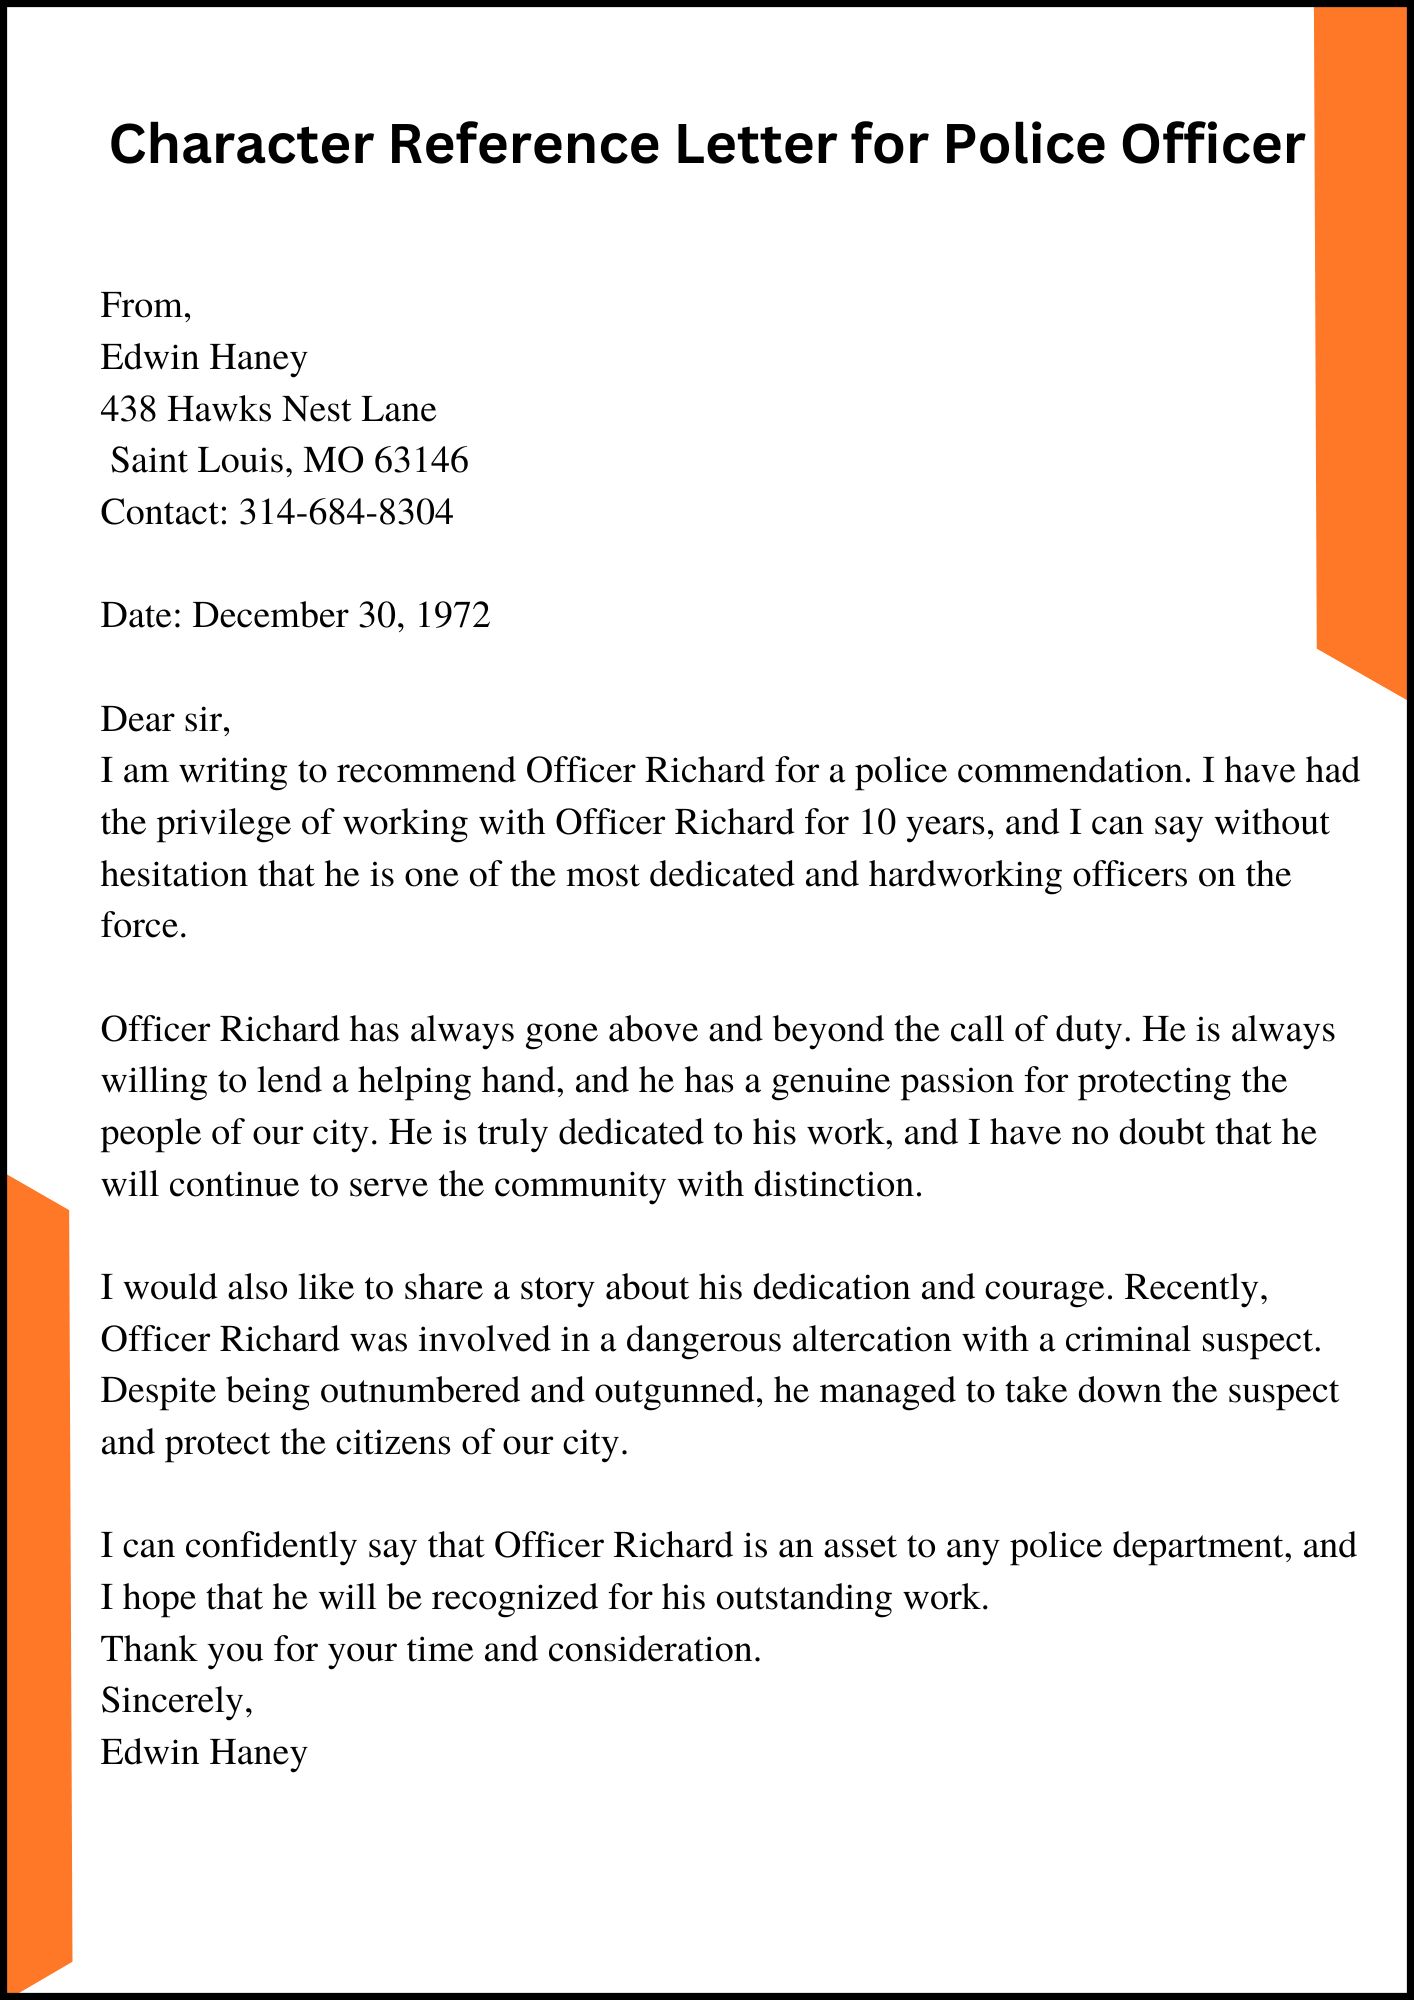 Character Reference Letter for Police Officer 